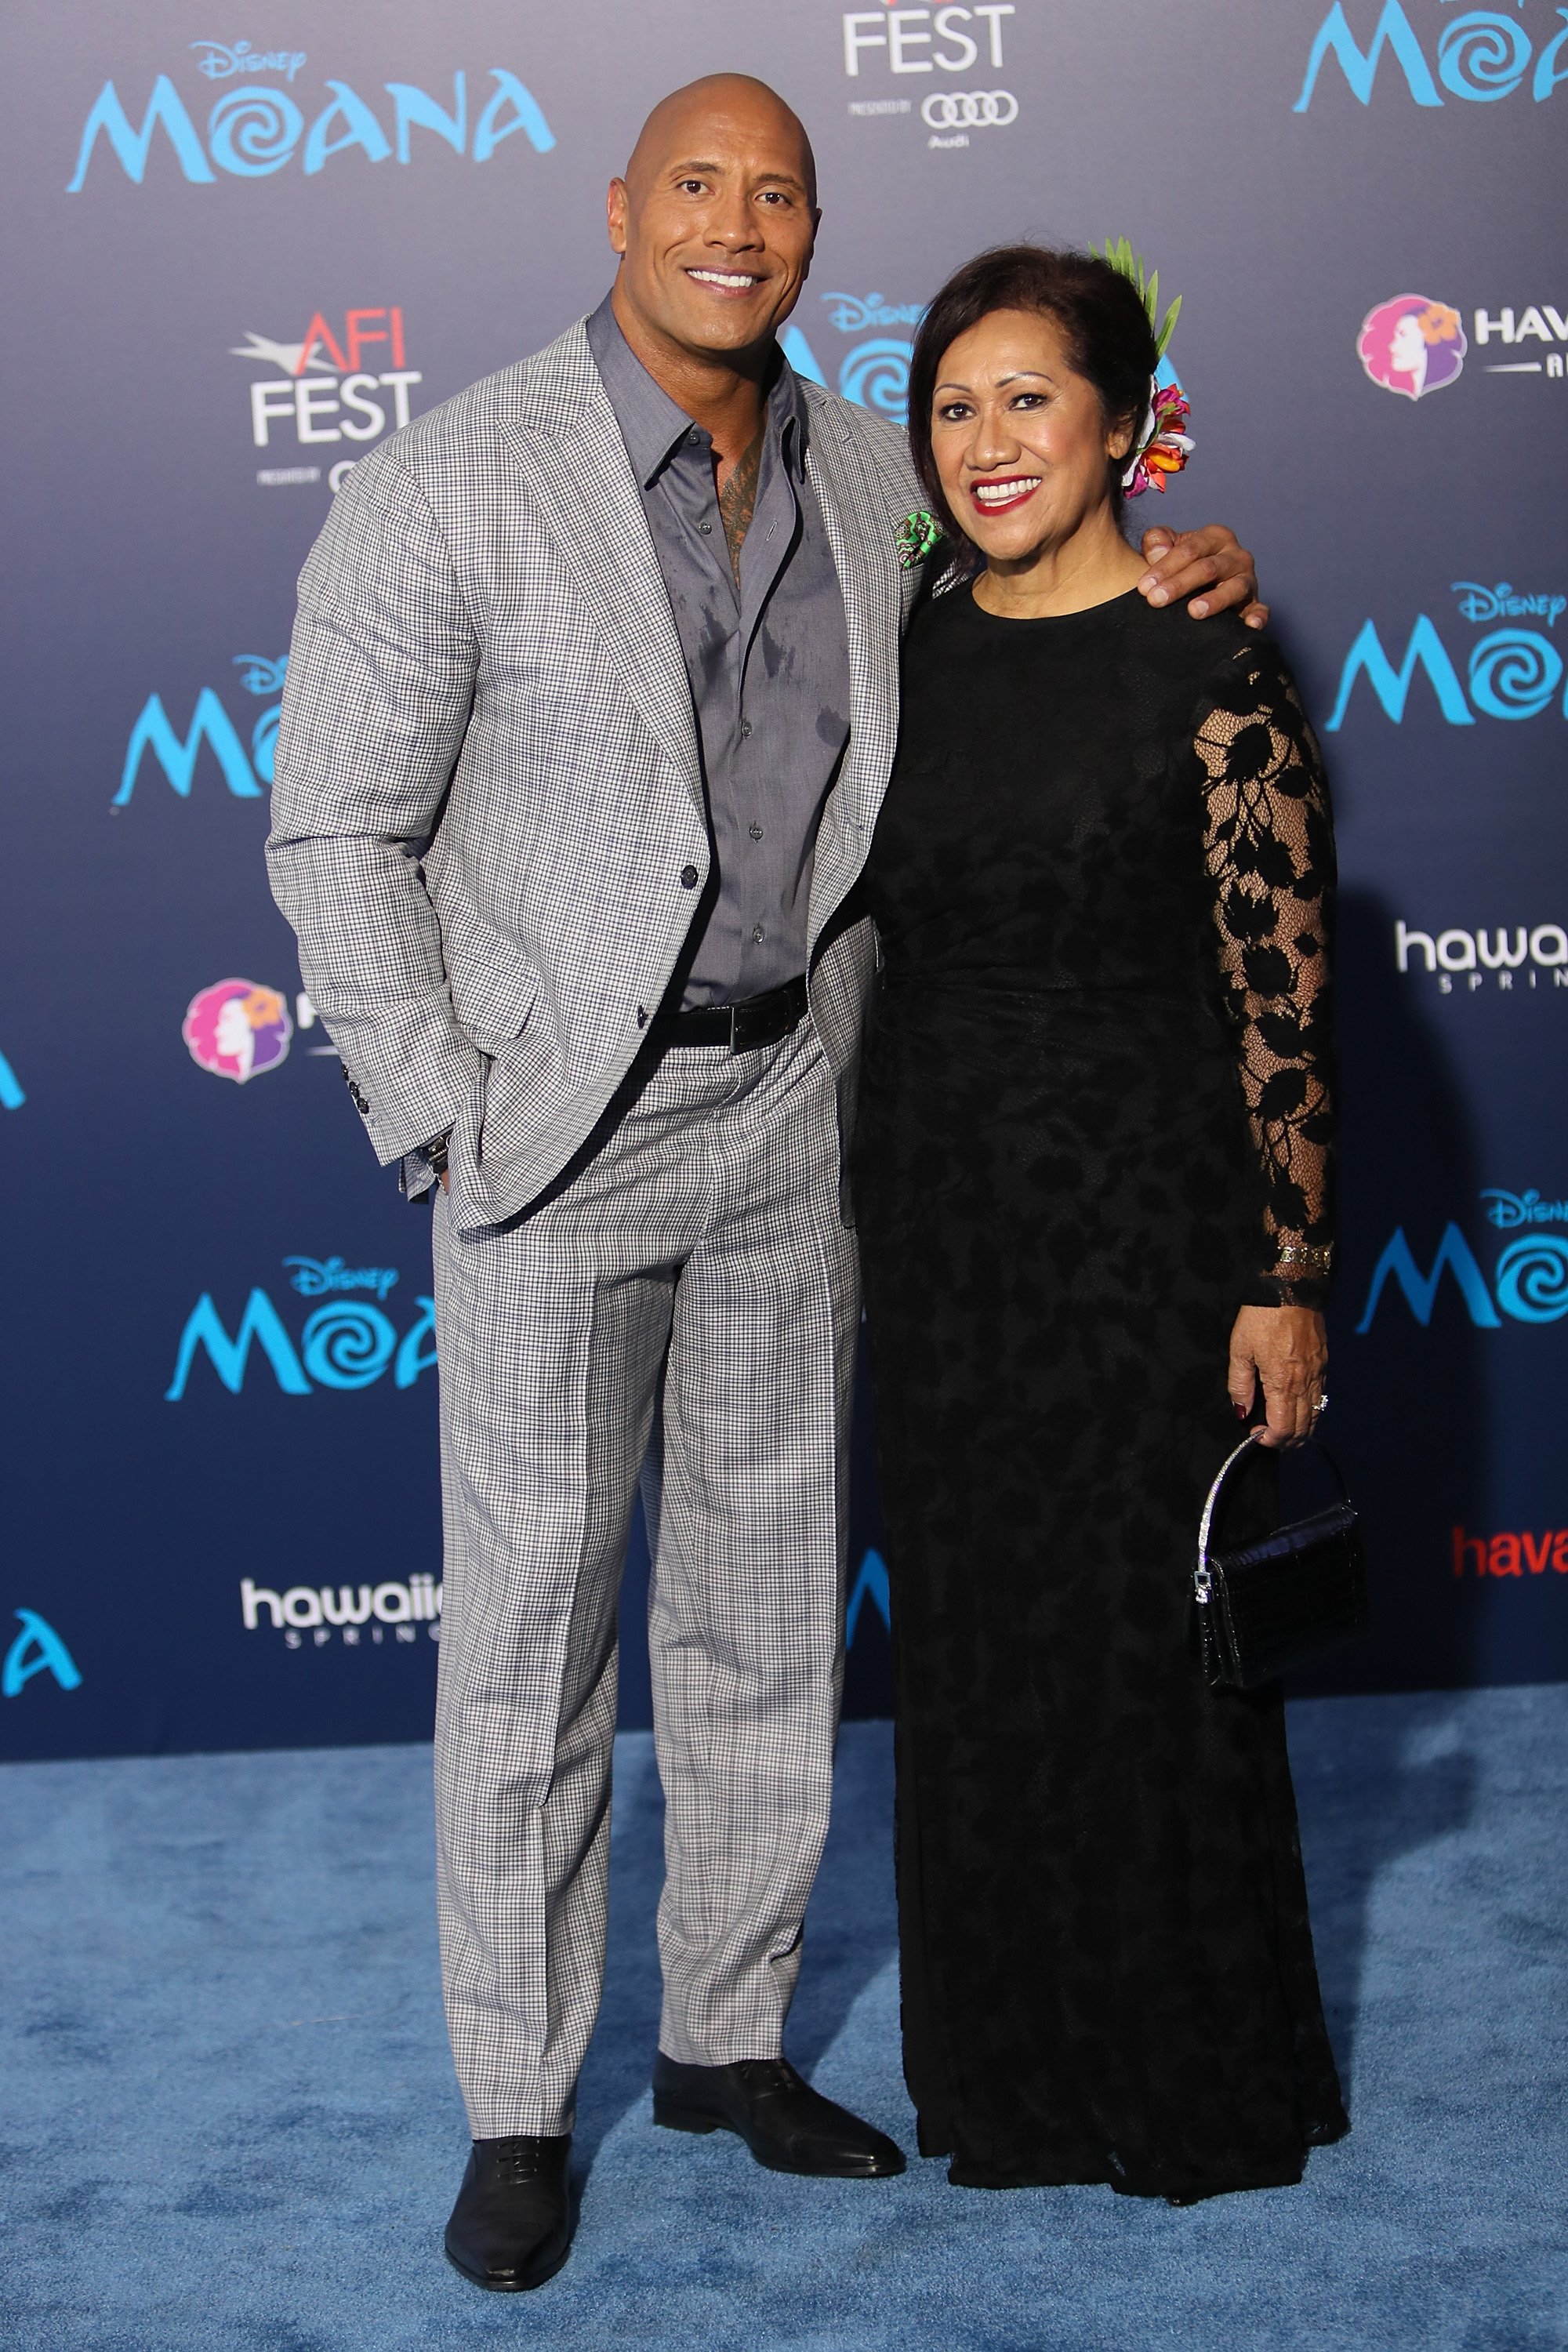 Dwayne Johnson and his mom, Ata Johnson at the El Capitan Theatre on November 14, 2016 in Hollywood, California. | Source: Getty Images